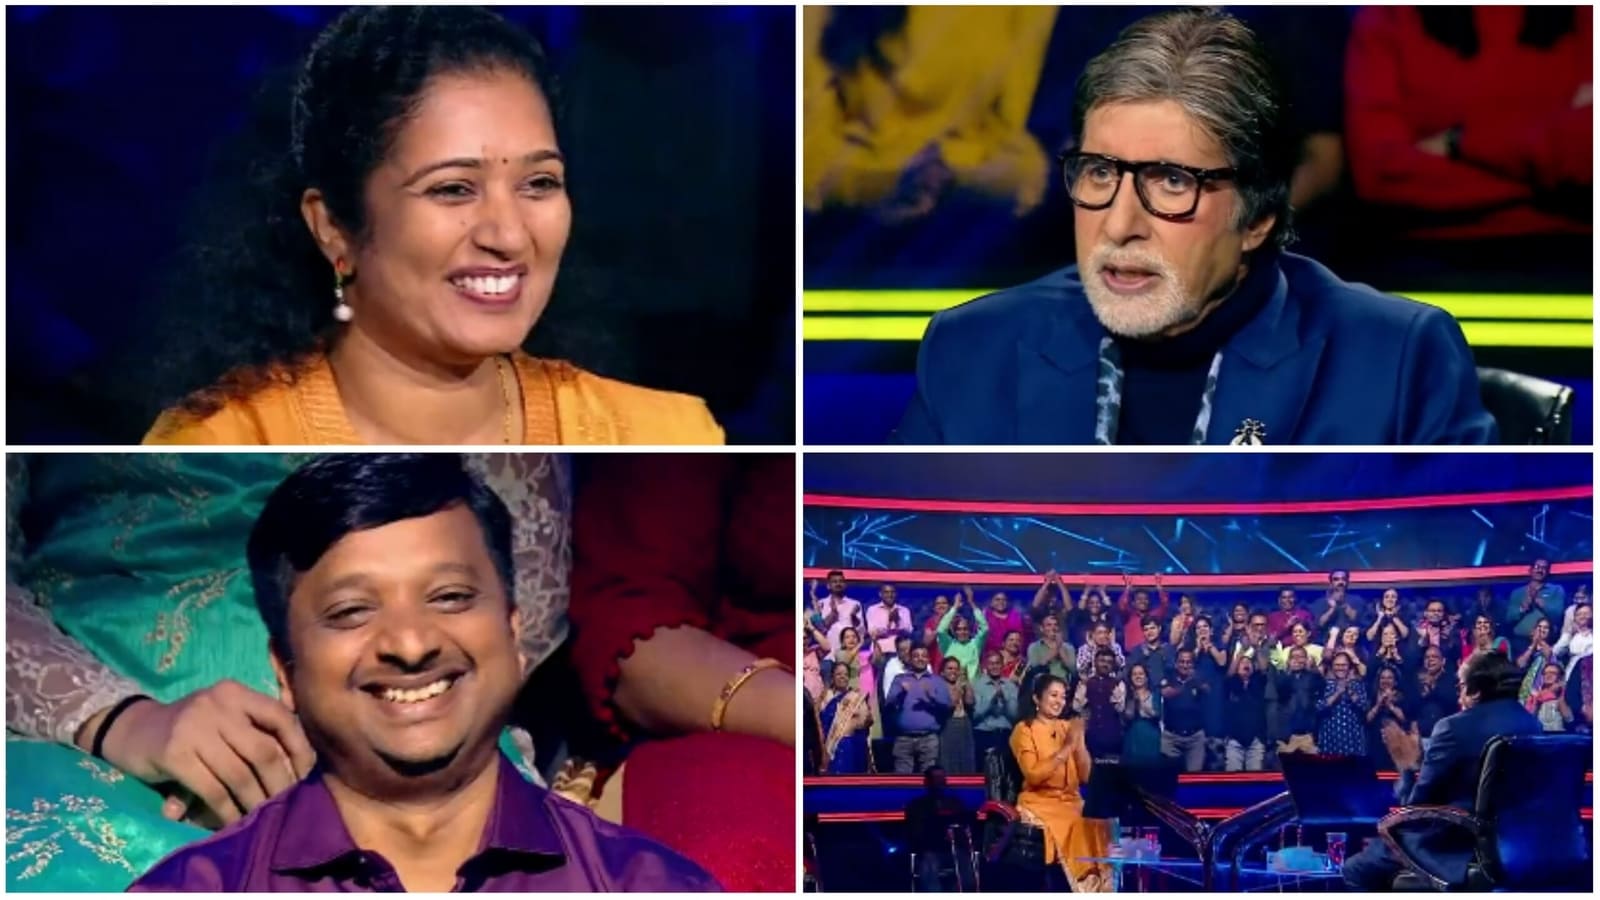 KBC 14: Woman reaches ₹1 crore question, shocks Amitabh Bachchan saying she won’t get husband anything from prize. Watch